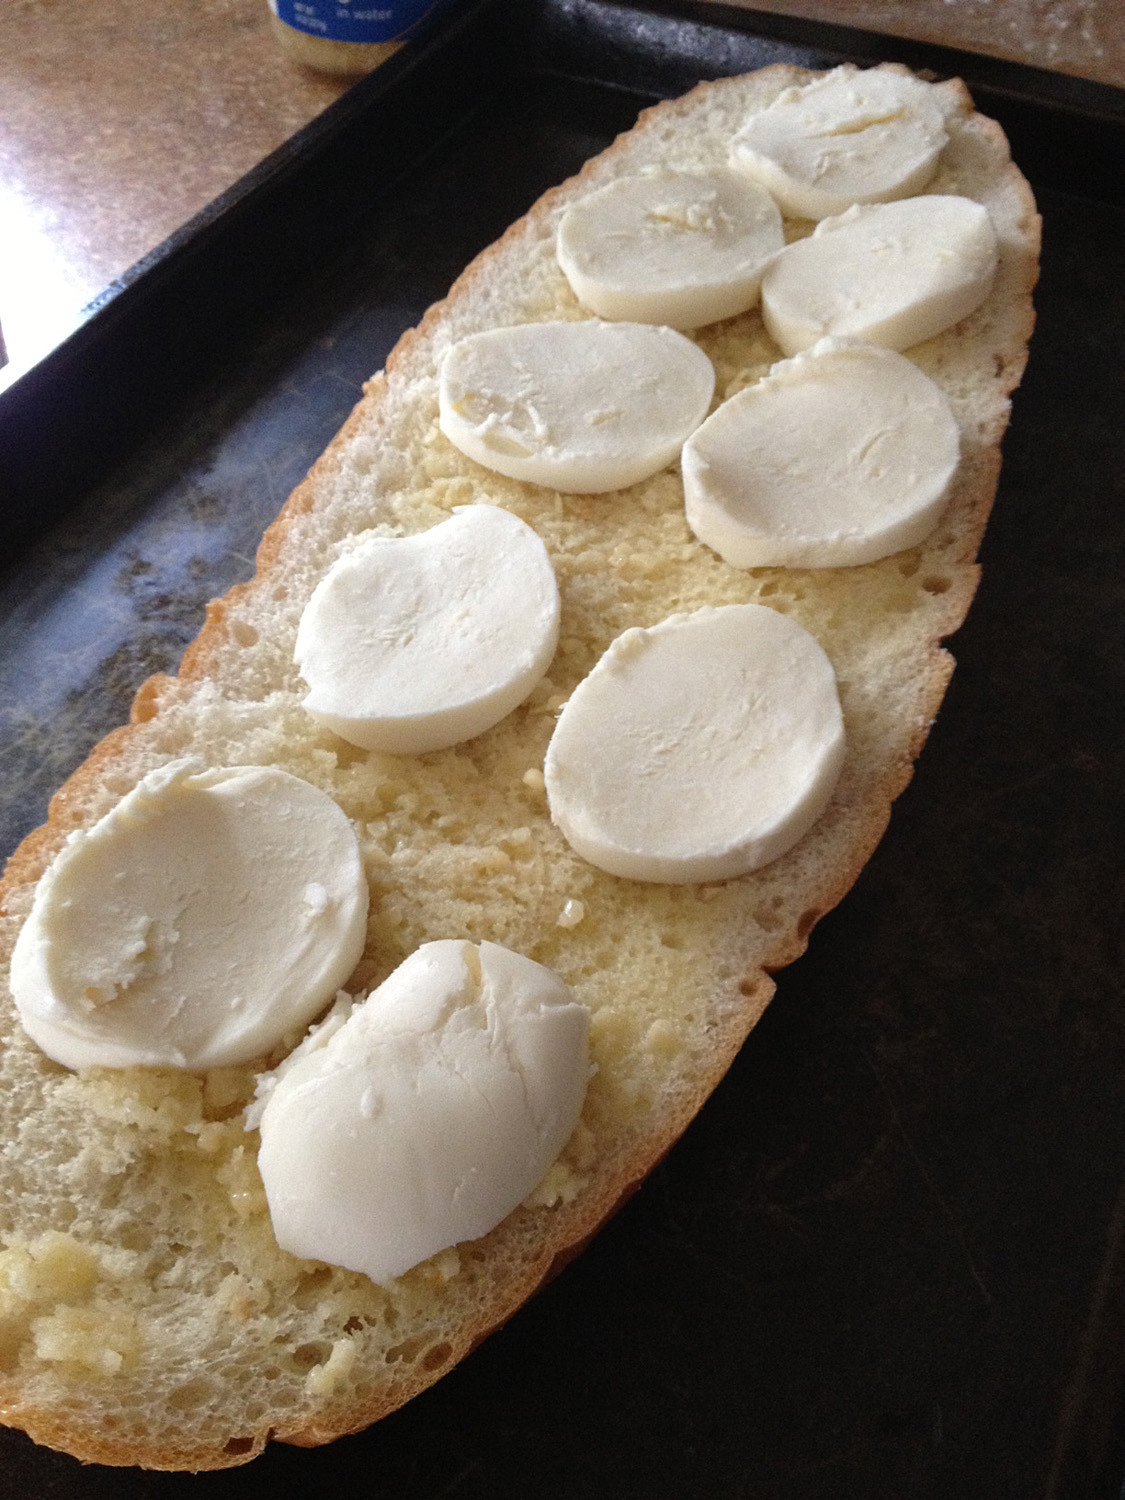 The garlic bread topped with fresh cheese prior to baking.